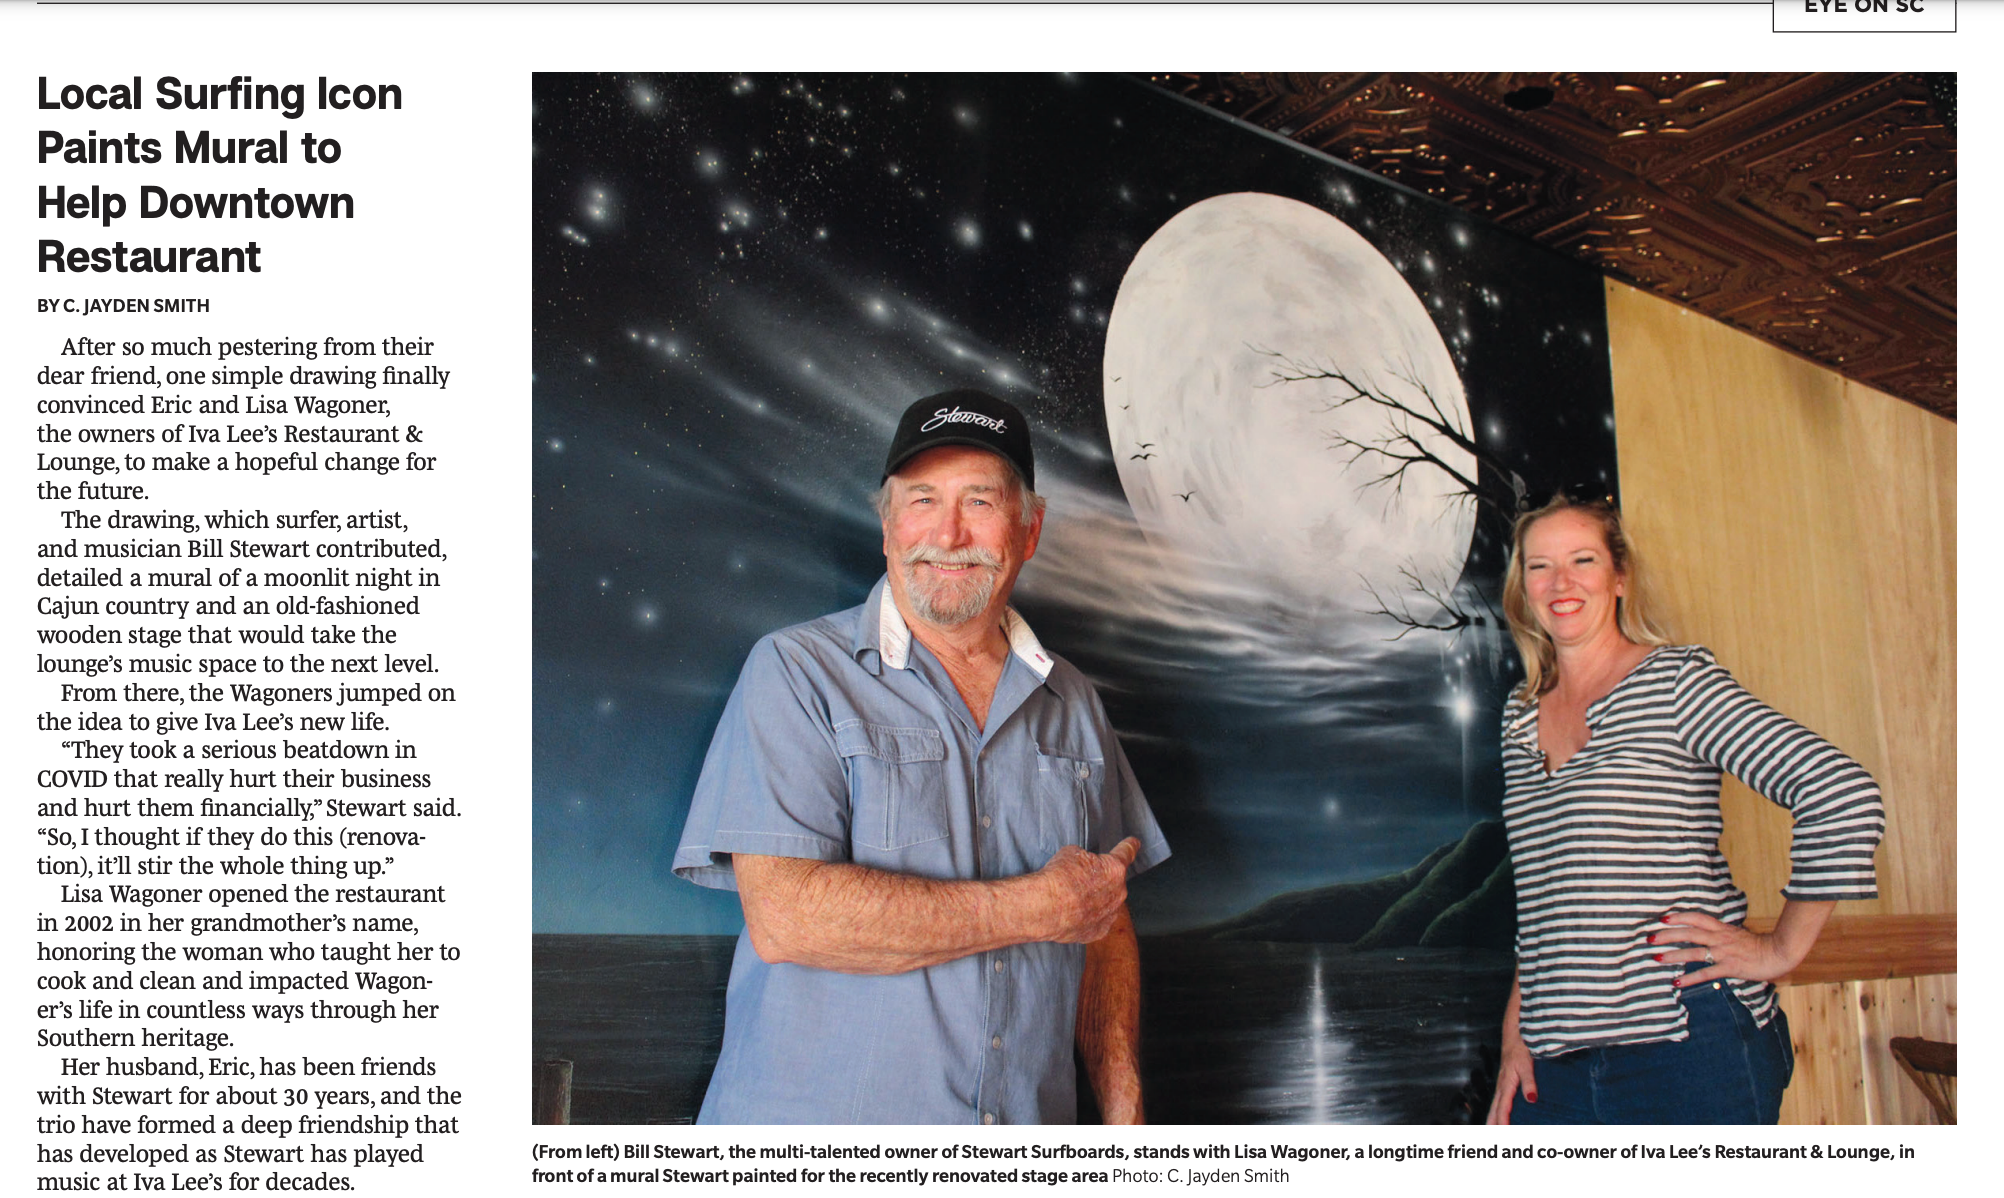 SC Times article about Bill's Mural at Iva Lee's Restaurant